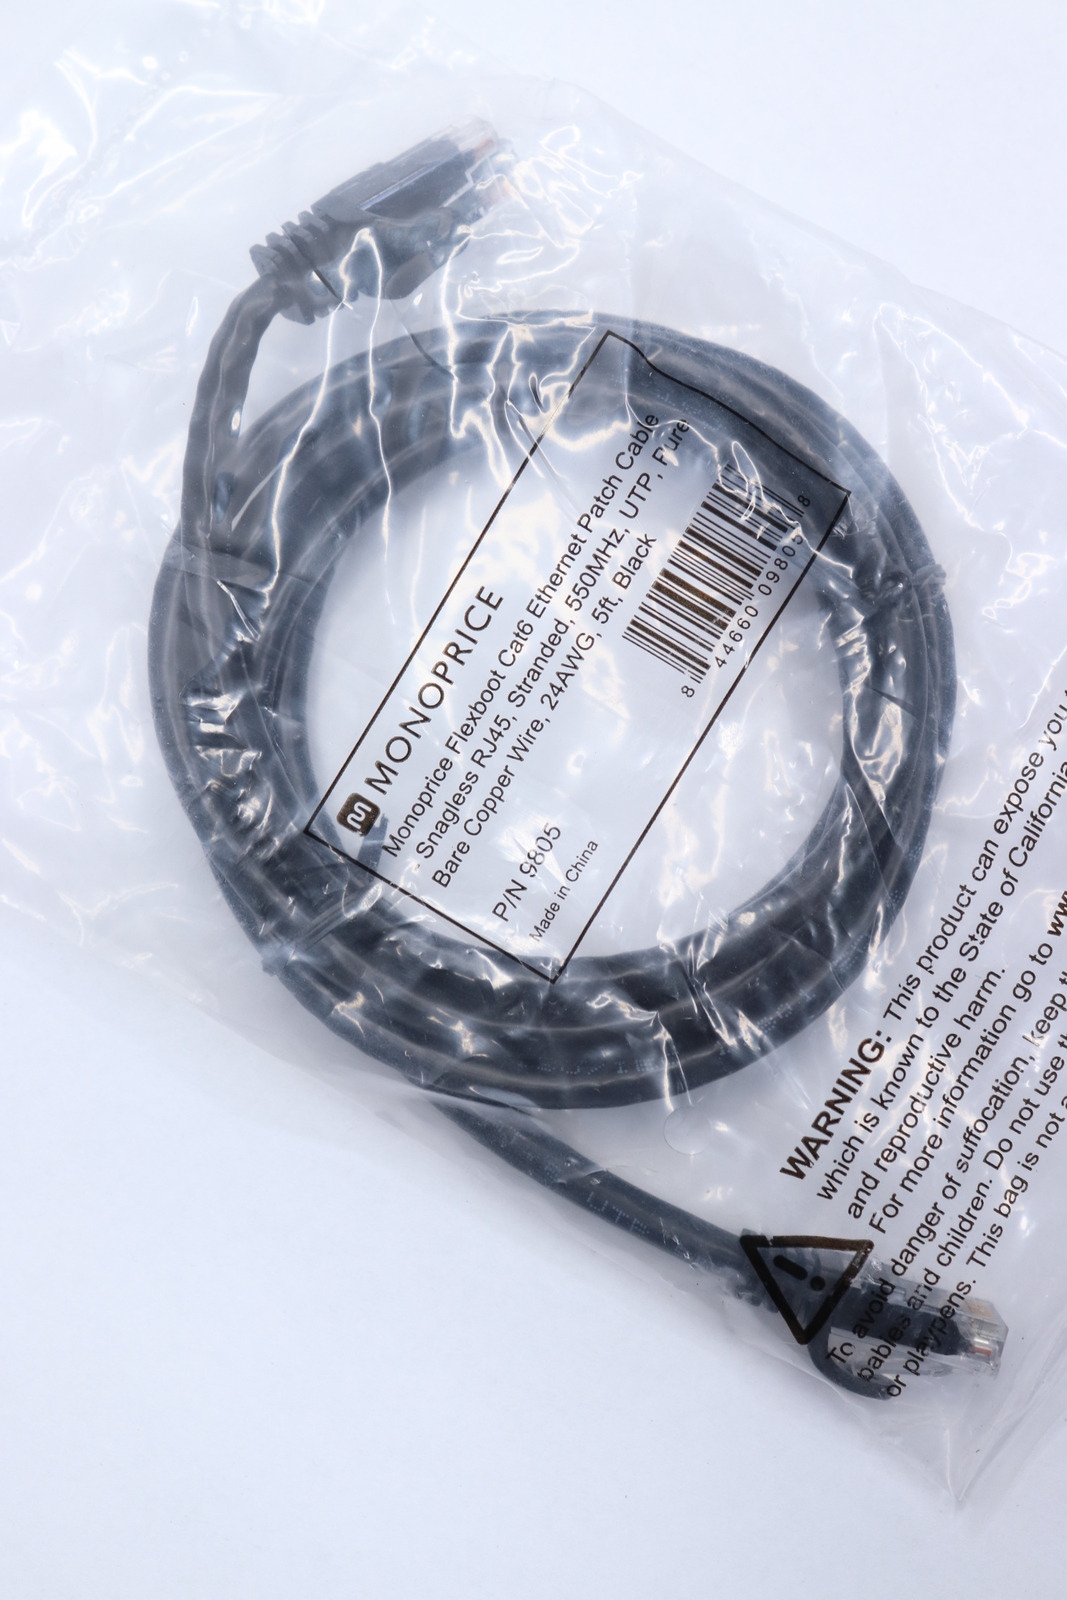 Monoprice Flexboot Cat6 Ethernet Patch Cable Stranded RJ45 Black 24 AWG 5' 9805